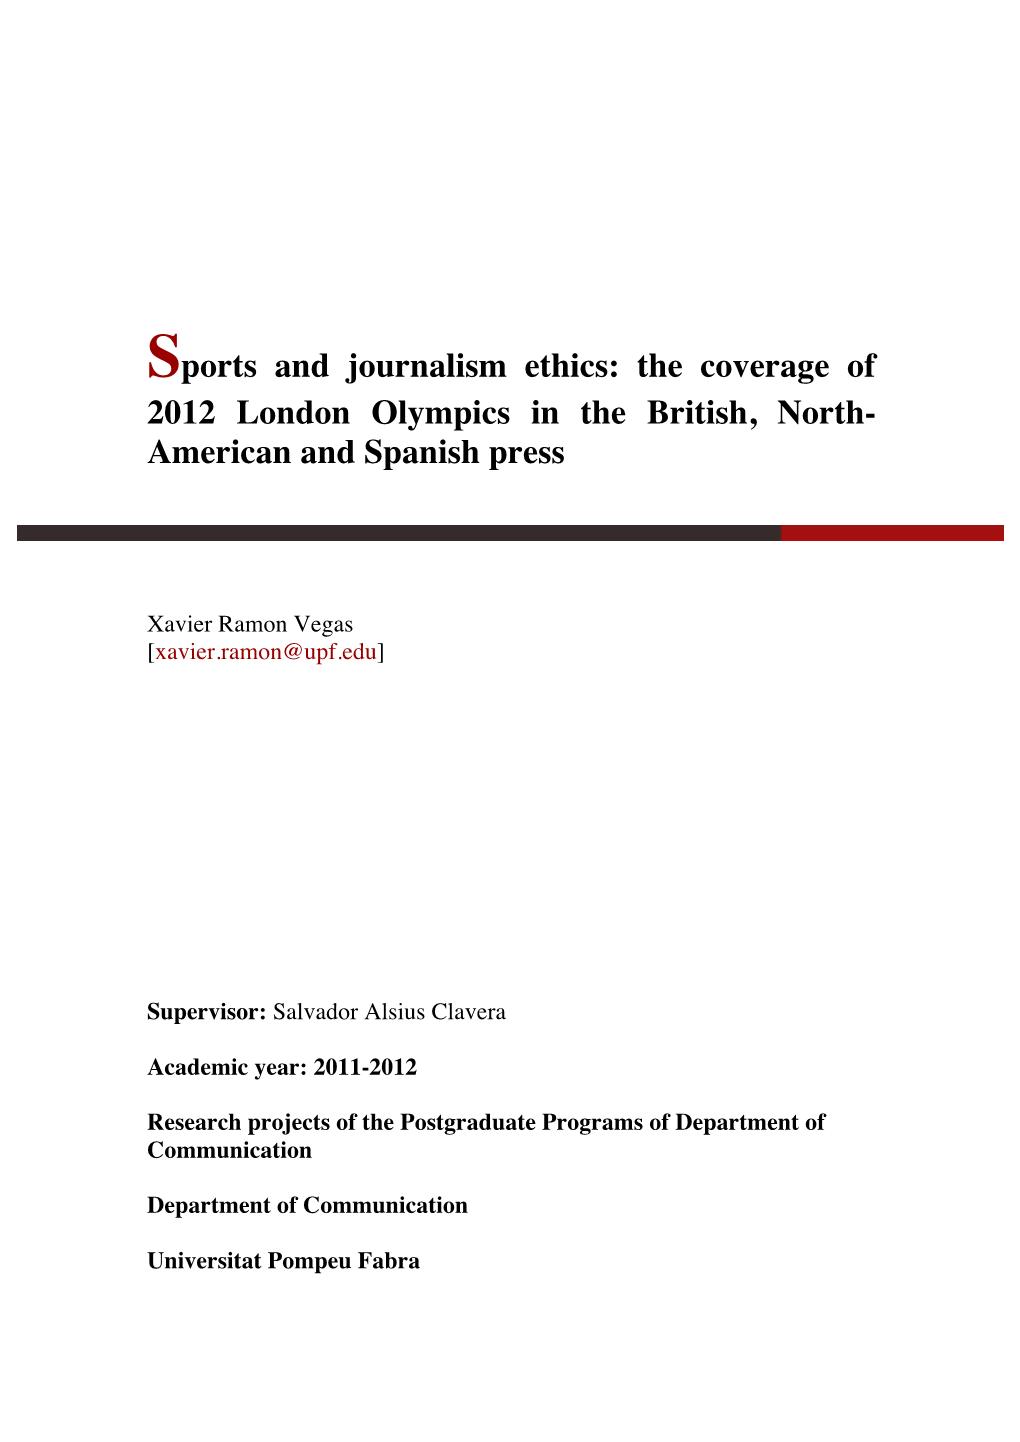 Sports and Journalism Ethics: the Coverage of 2012 London Olympics in the British, North- American and Spanish Press